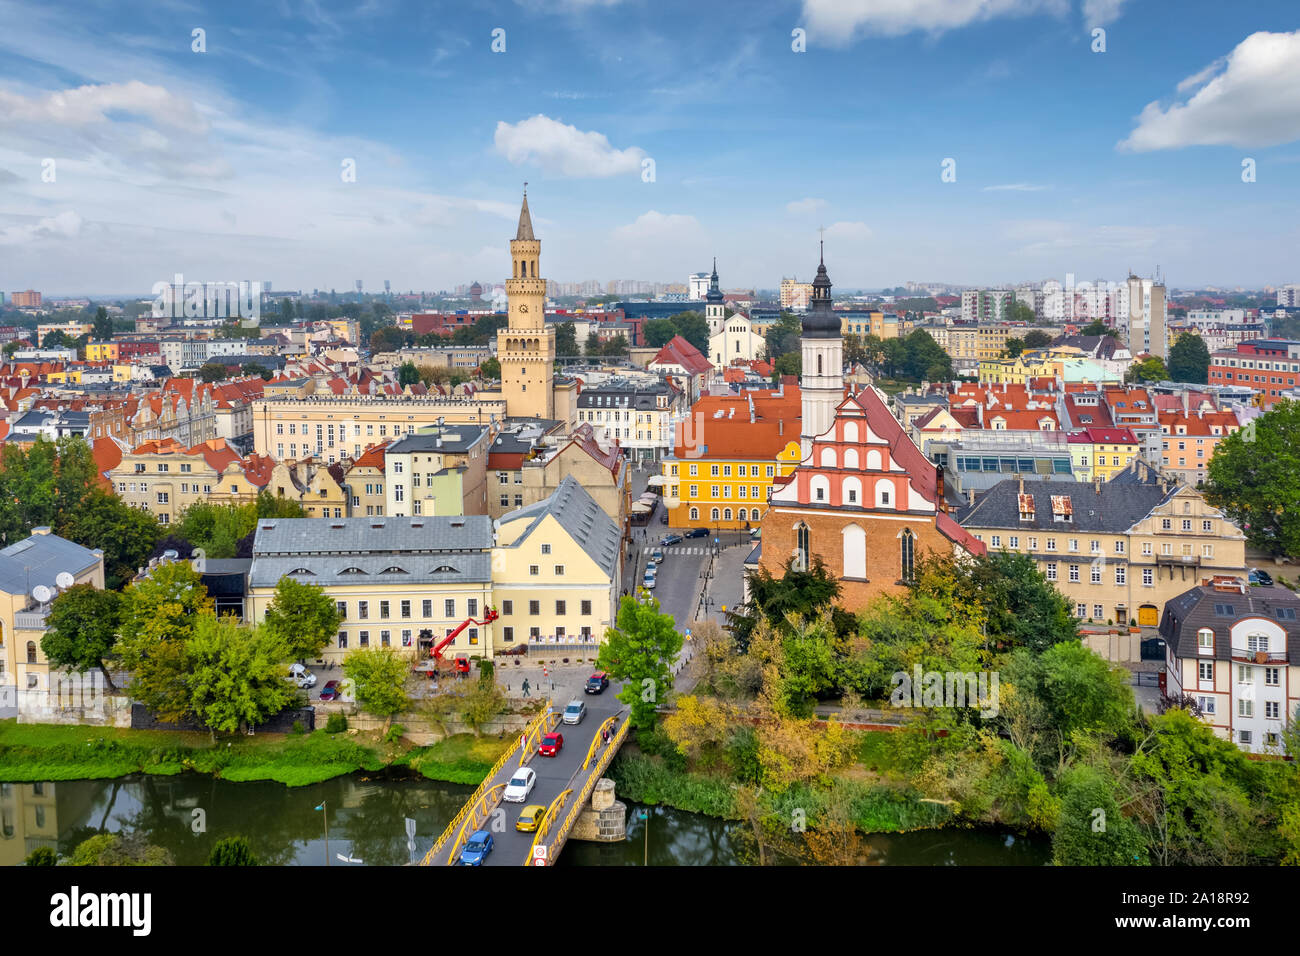 Opole, Poland. Aerial view of Old Town Stock Photo